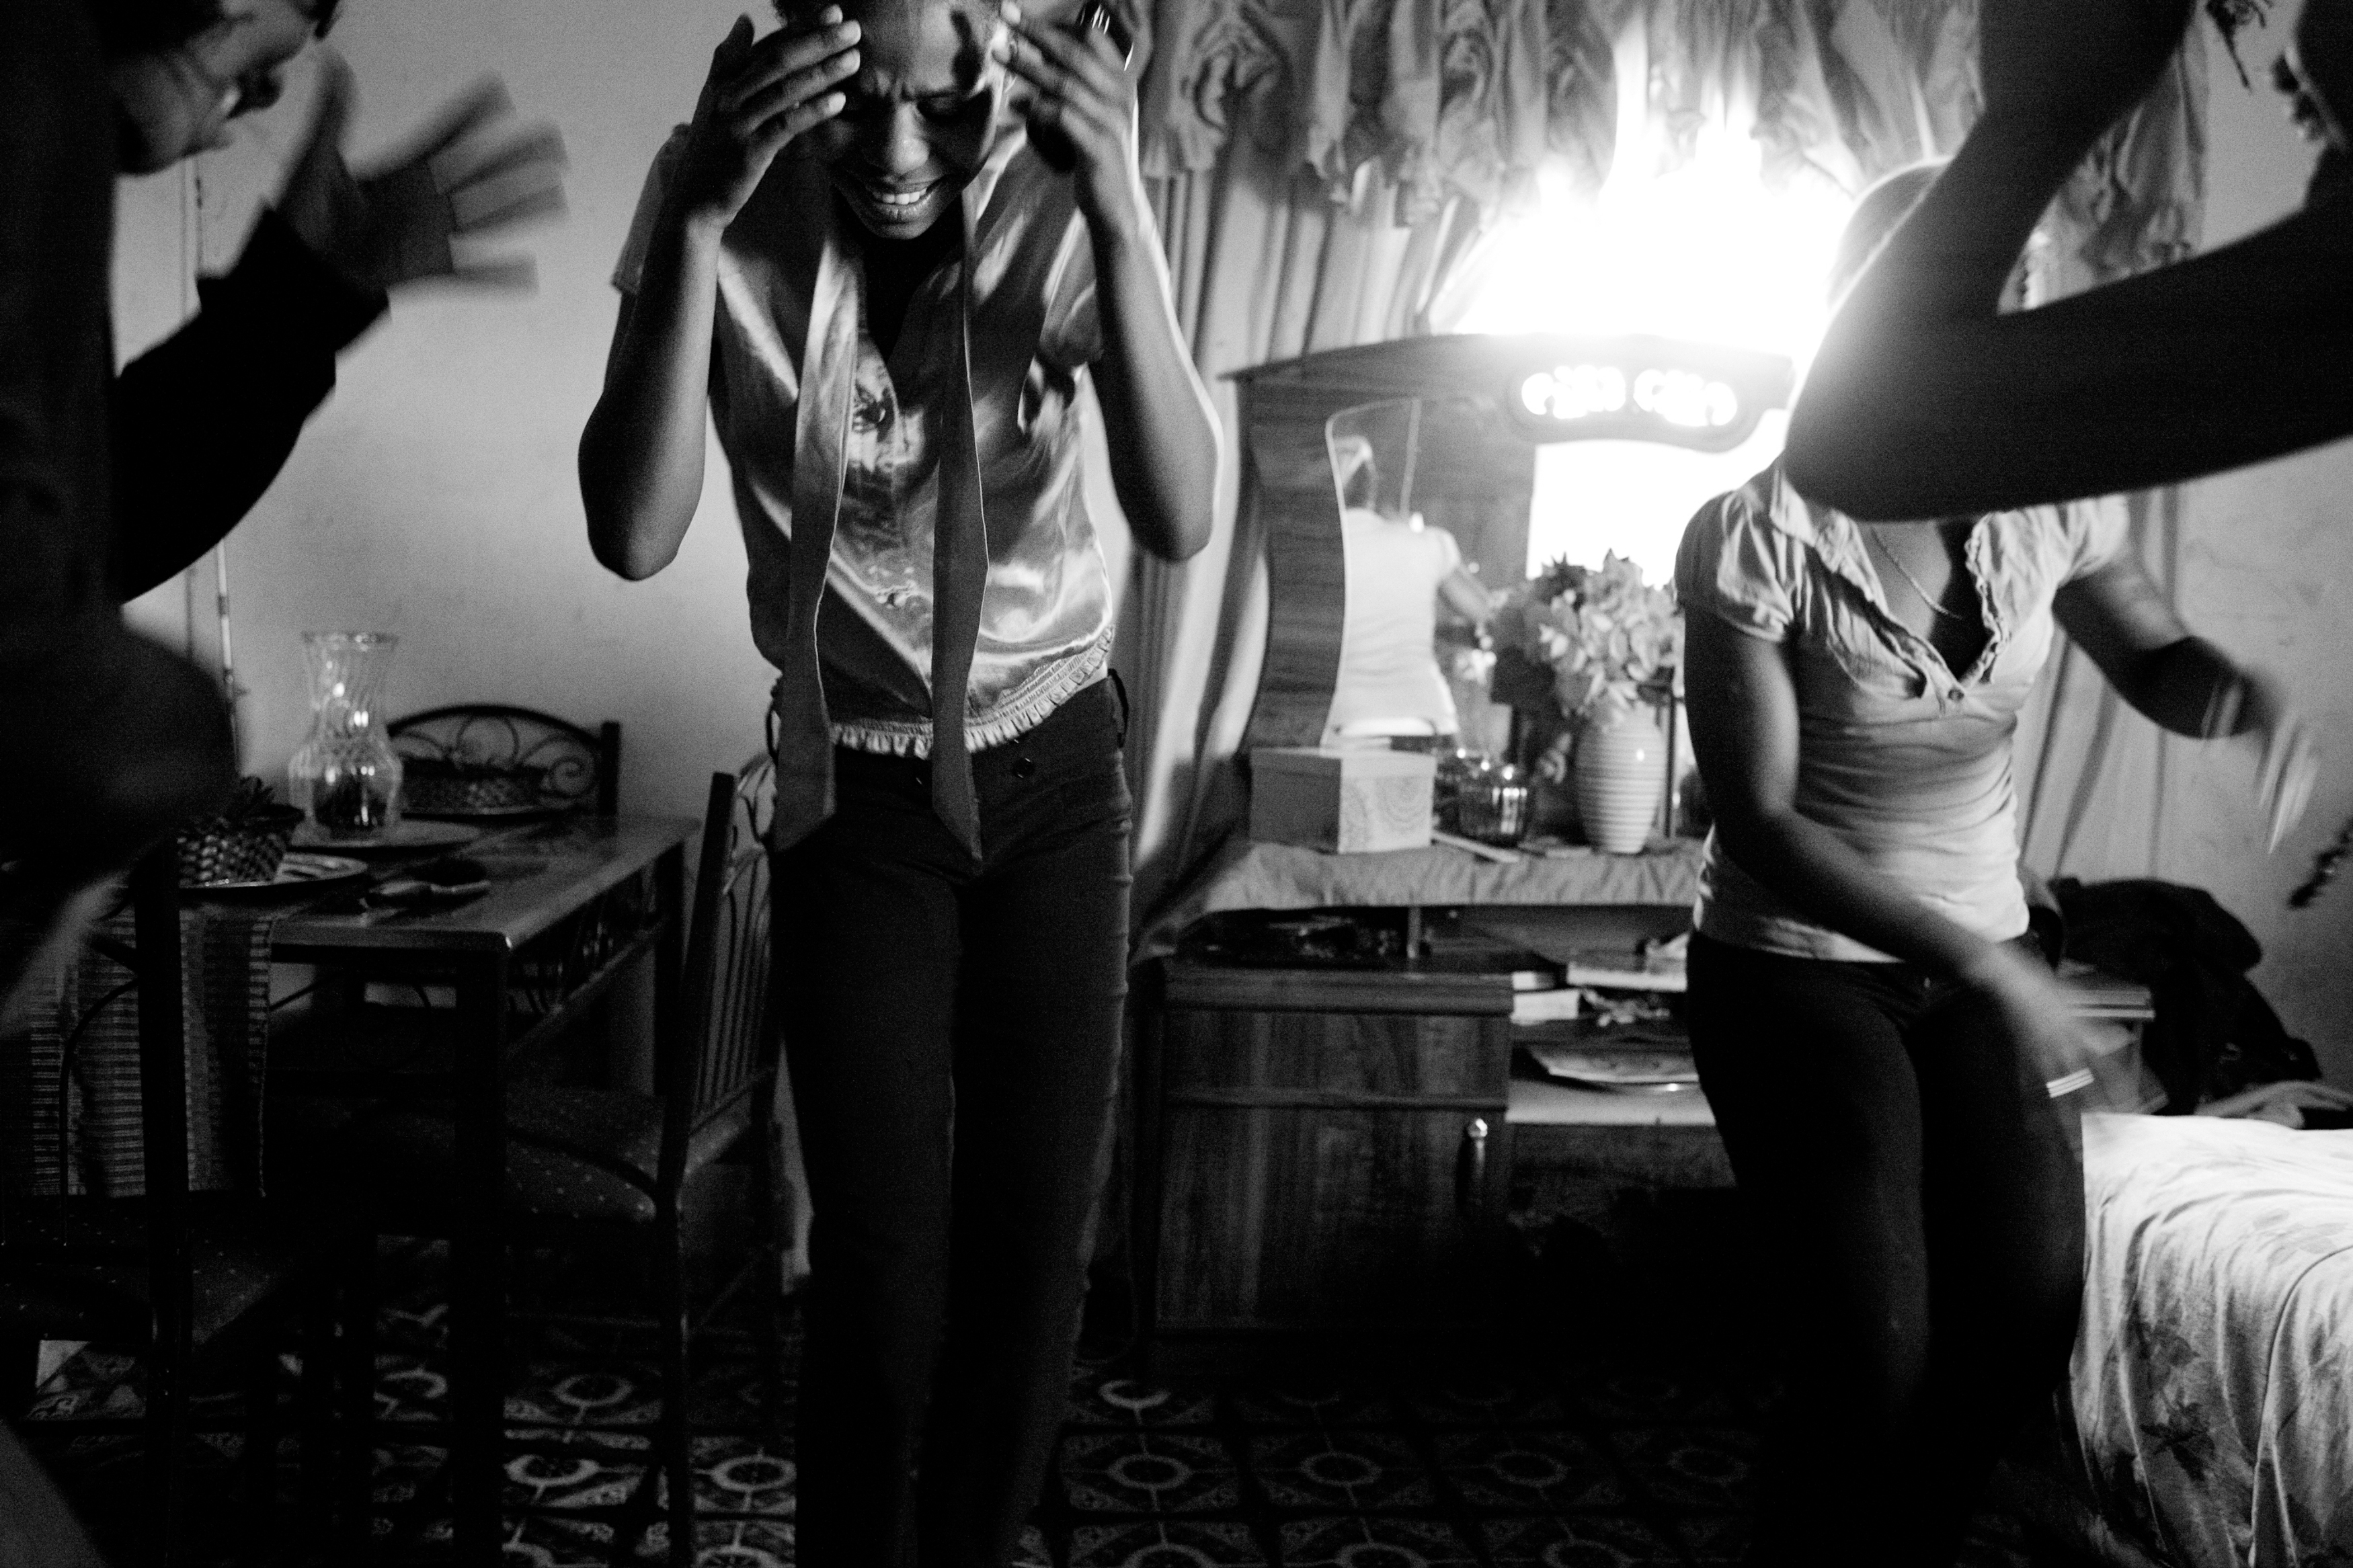 Chelmidene Whiteboy, 16 (left), and Isabelle Whiteboy, 18 (right), dance to Kwaito music with friends at their family home, in the predominately Afrikaans-speaking mixed-race neighborhood of Hooggenoeg in Grahamstown, South Africa. “I’m worried about this generation just wanting smart clothes,” says their mother, Sandra Whiteboy, “but things are changing. The young people who come in now”—to the supermarket—“know me, and they call my name. Before, with apartheid, they did not know me, and they did not call my name. I want these girls to see those changes, too.”